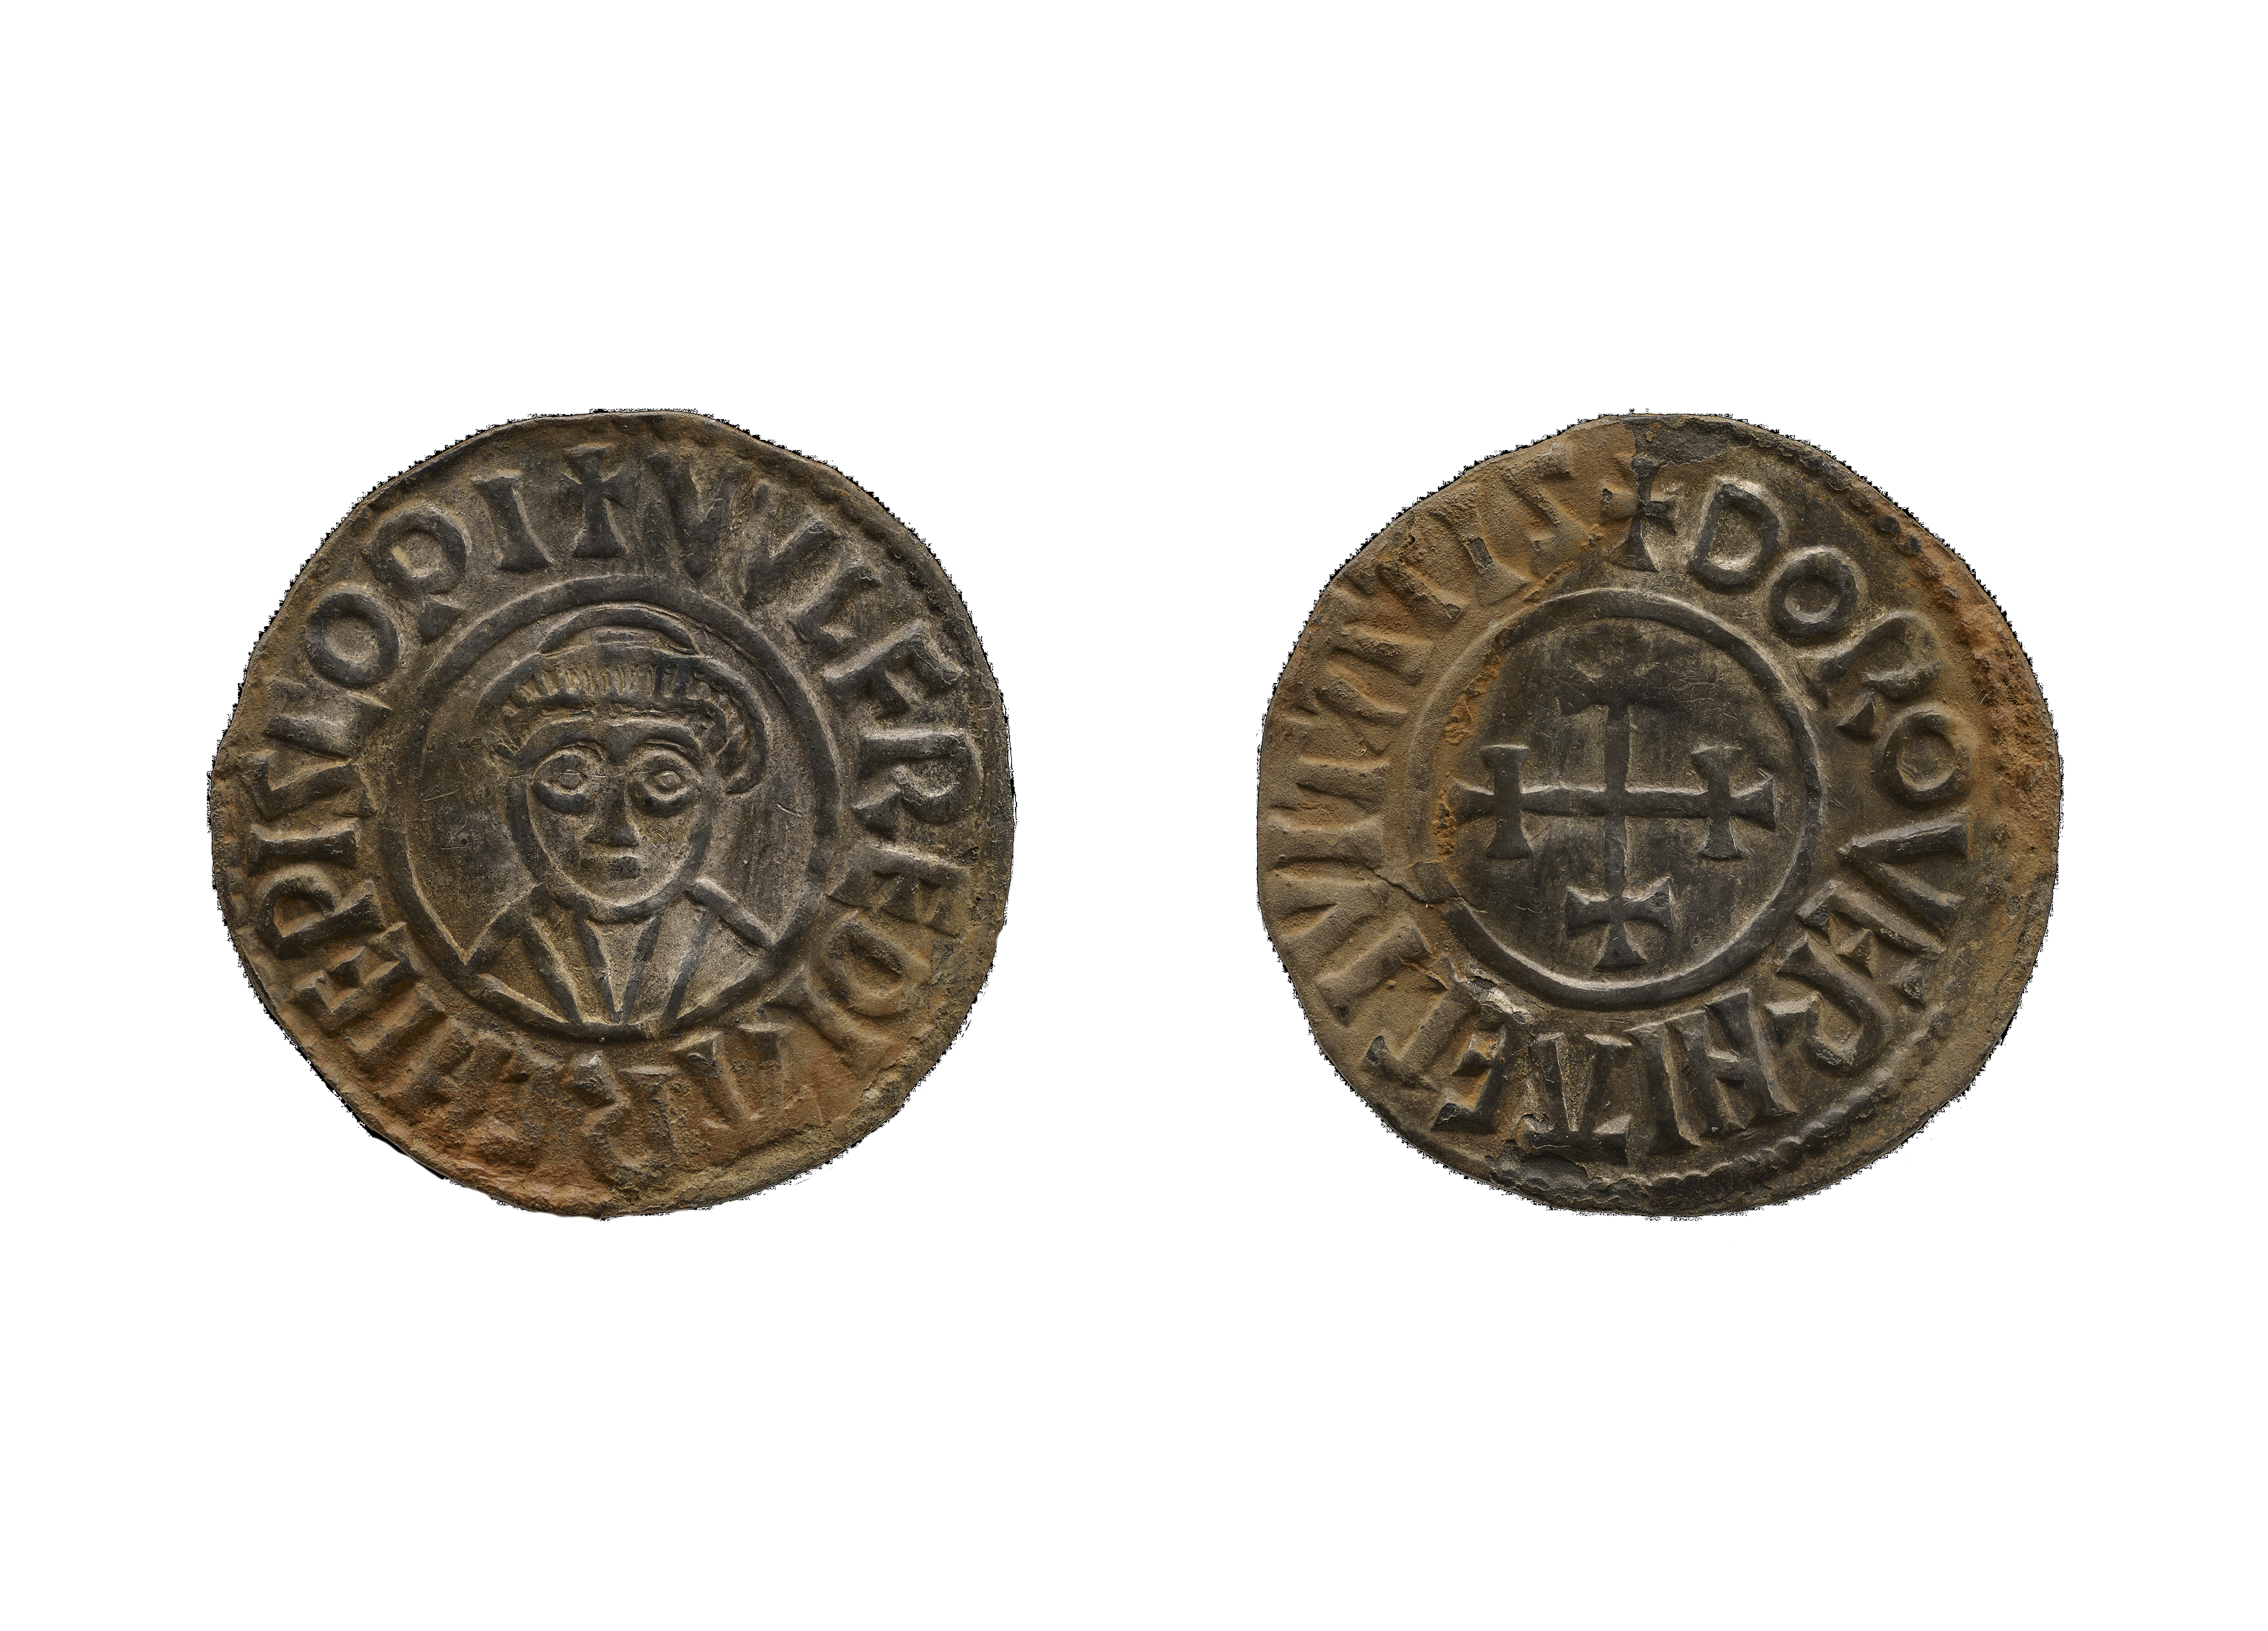 Silver coin of Archbishop Wulfred of Canterbury (805-832), minted in Canterbury, probably between 805 and 810